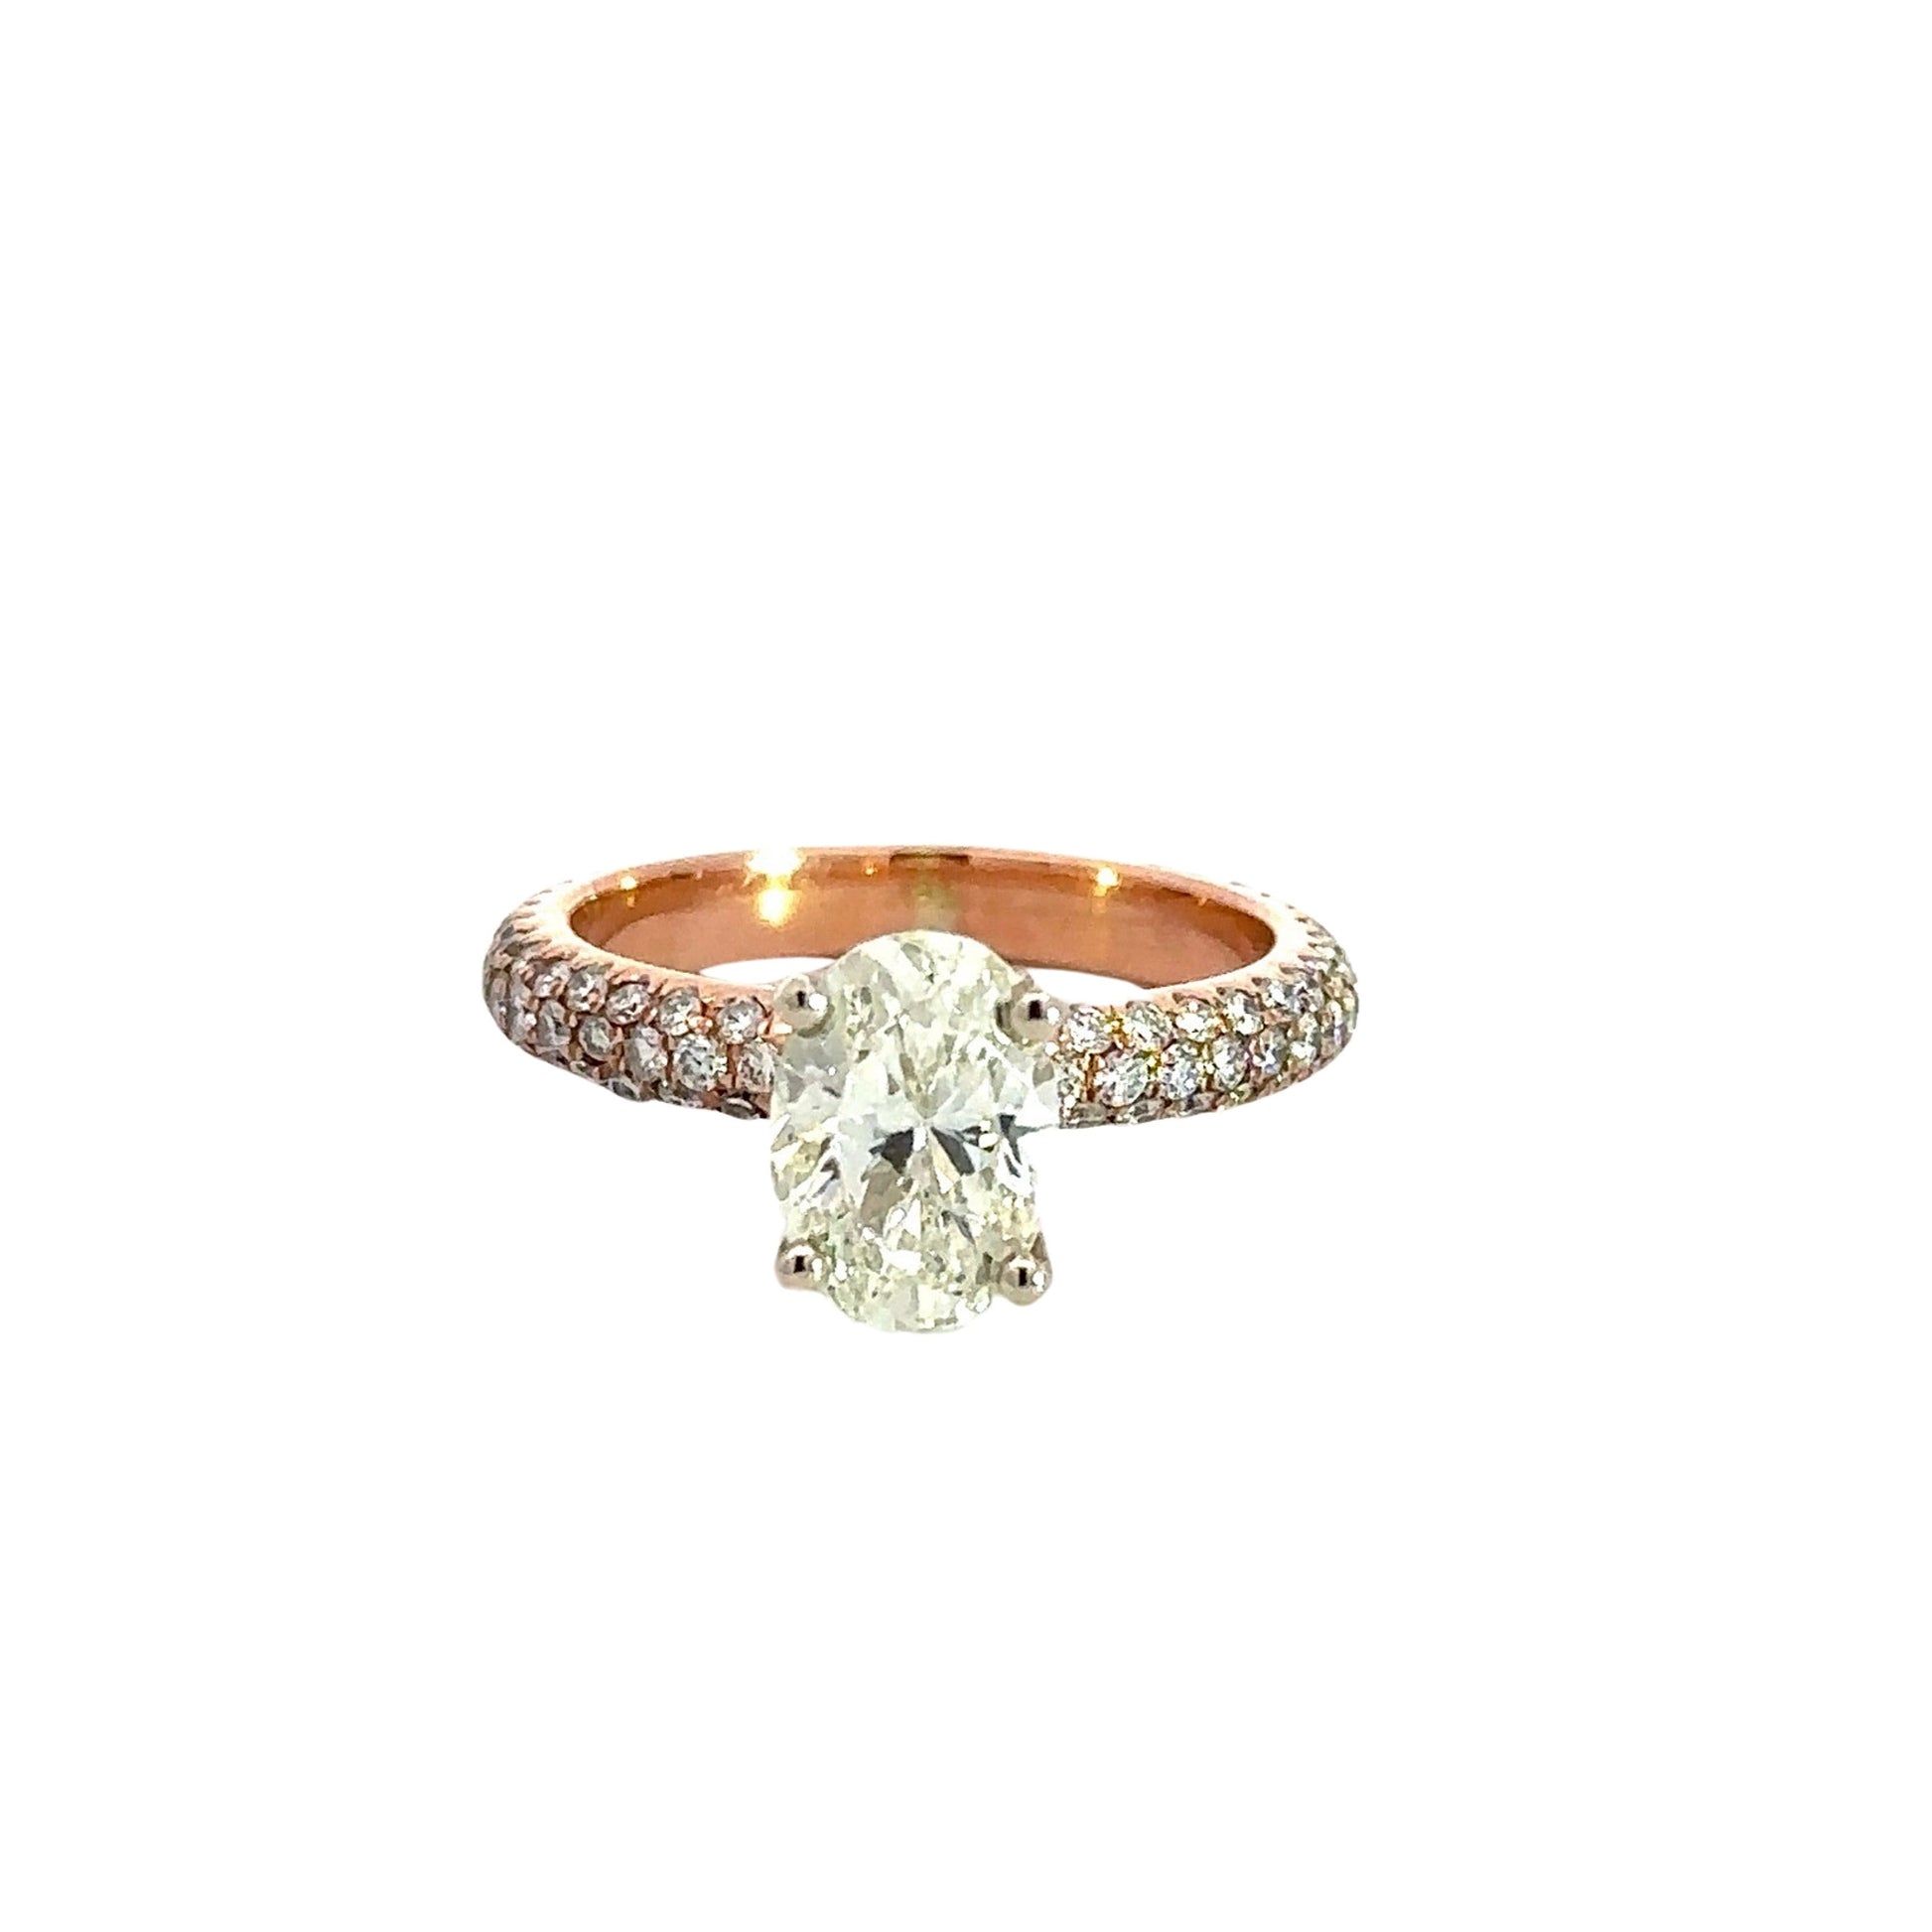 1.01 carat oval diamond as center stone with 3 rows of small round diamonds on the band on each side set in rose gold.